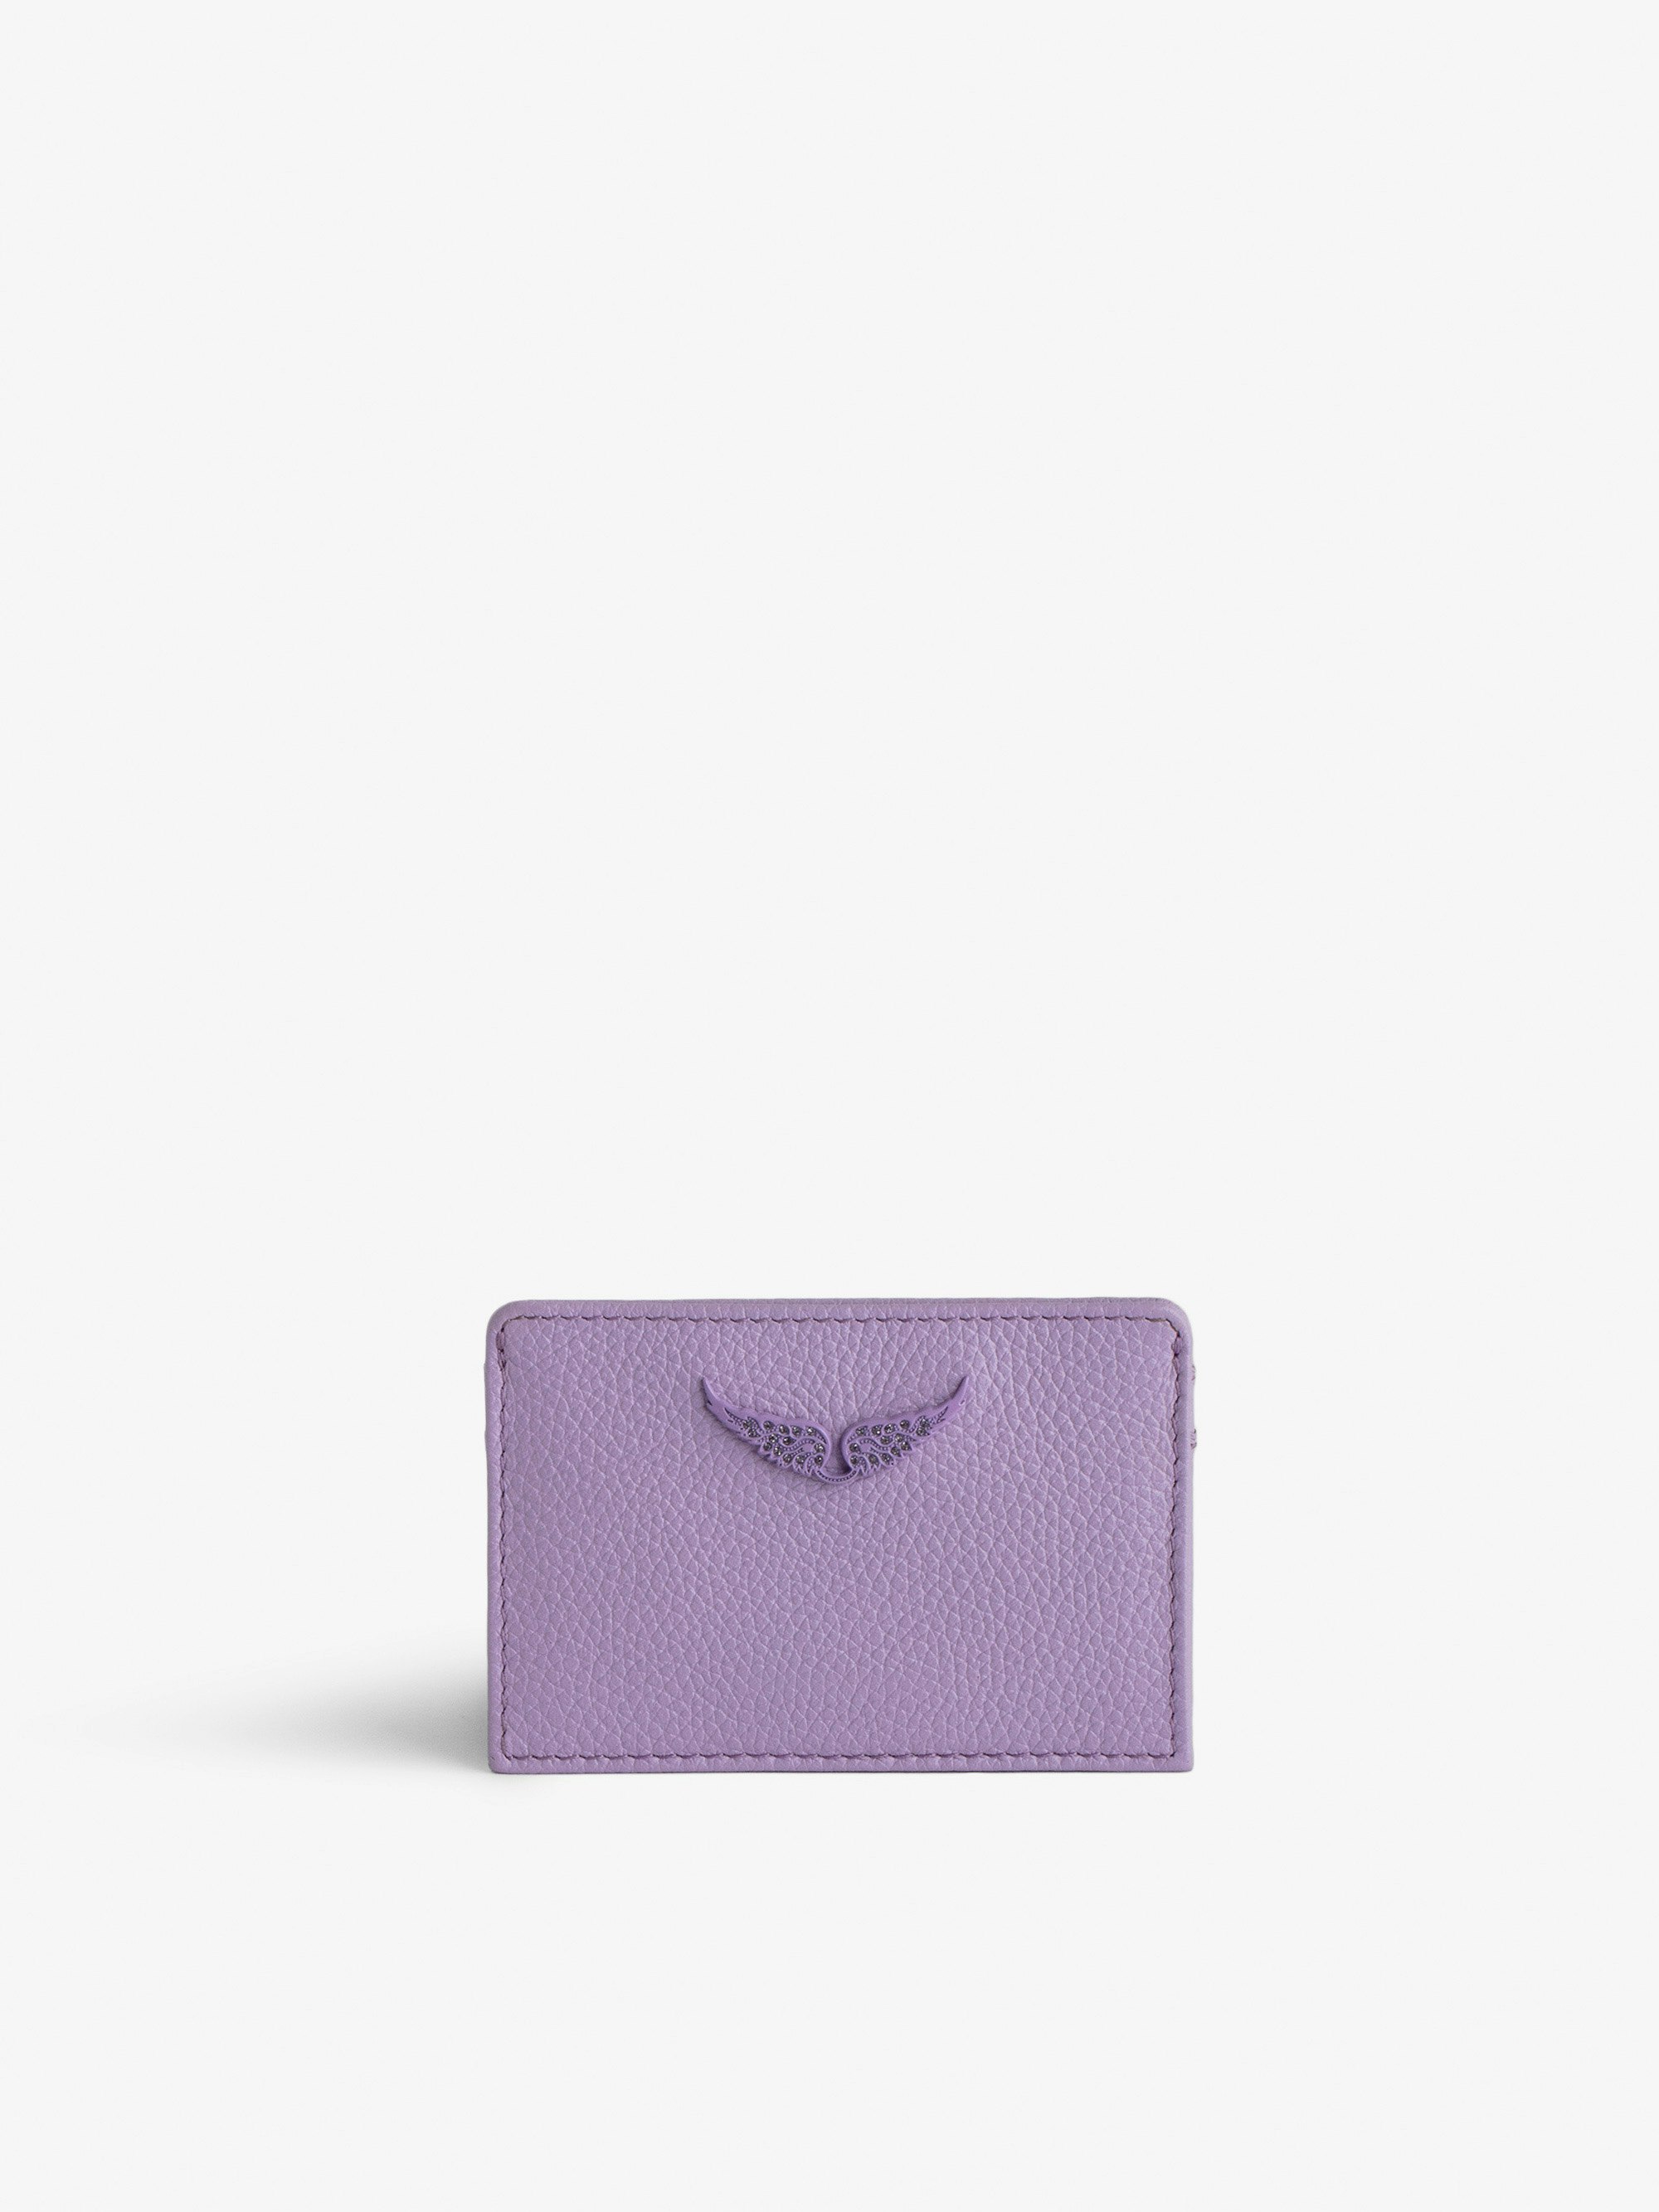 ZV Pass Card Holder - Purple grained leather card holder with diamanté wings charm.